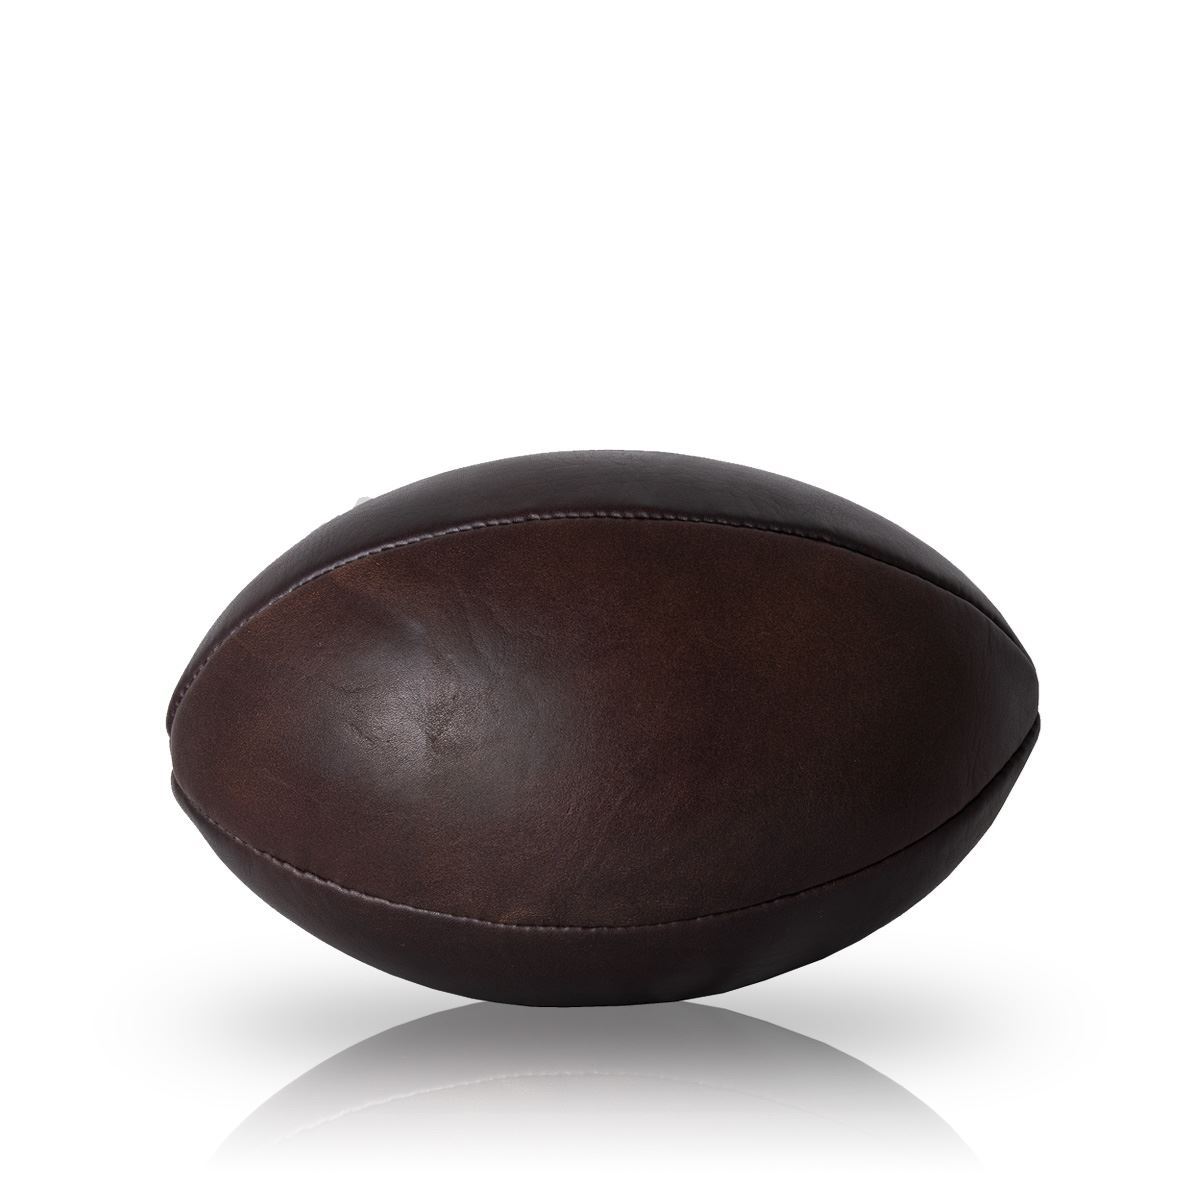 The P. Goldsmith Sons Co. | Vintage Rugby Ball 1930 - Dark Brown